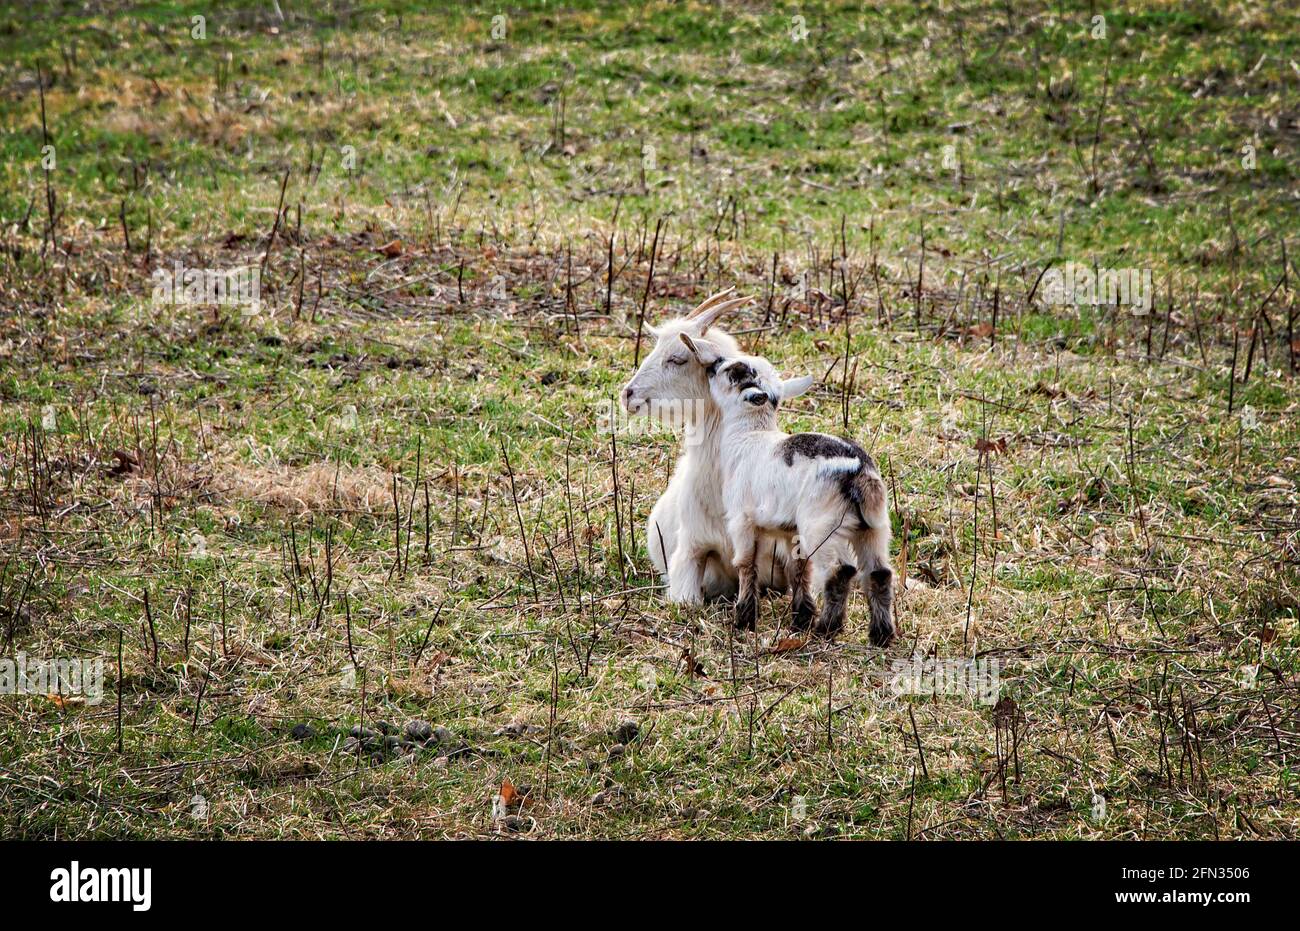 Affection between mother goat and baby goat. Stock Photo